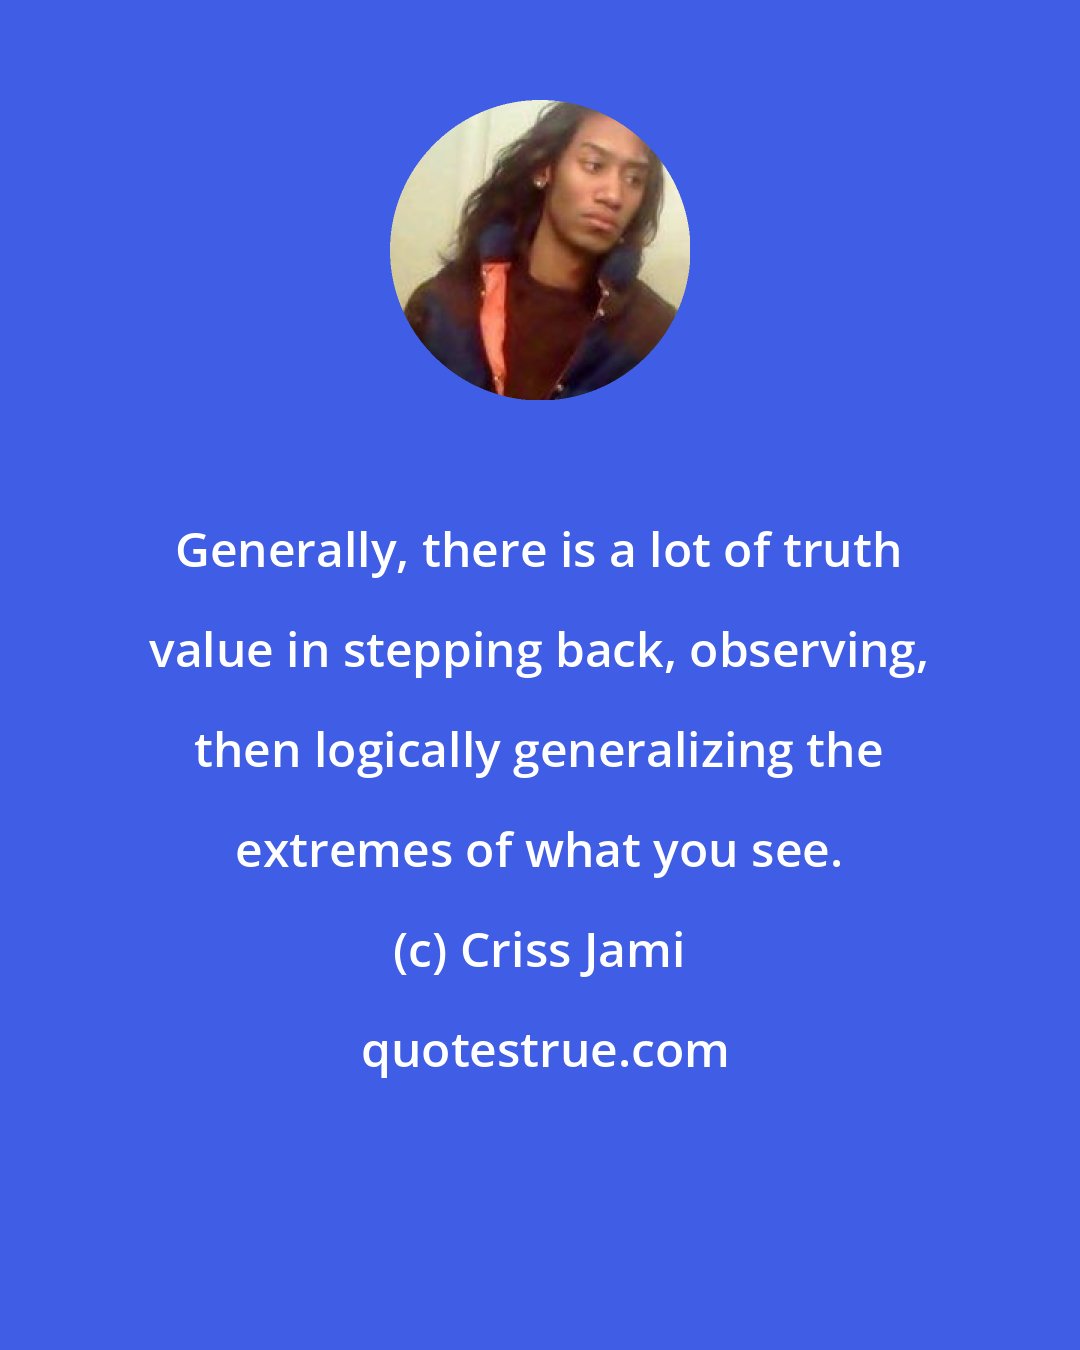 Criss Jami: Generally, there is a lot of truth value in stepping back, observing, then logically generalizing the extremes of what you see.